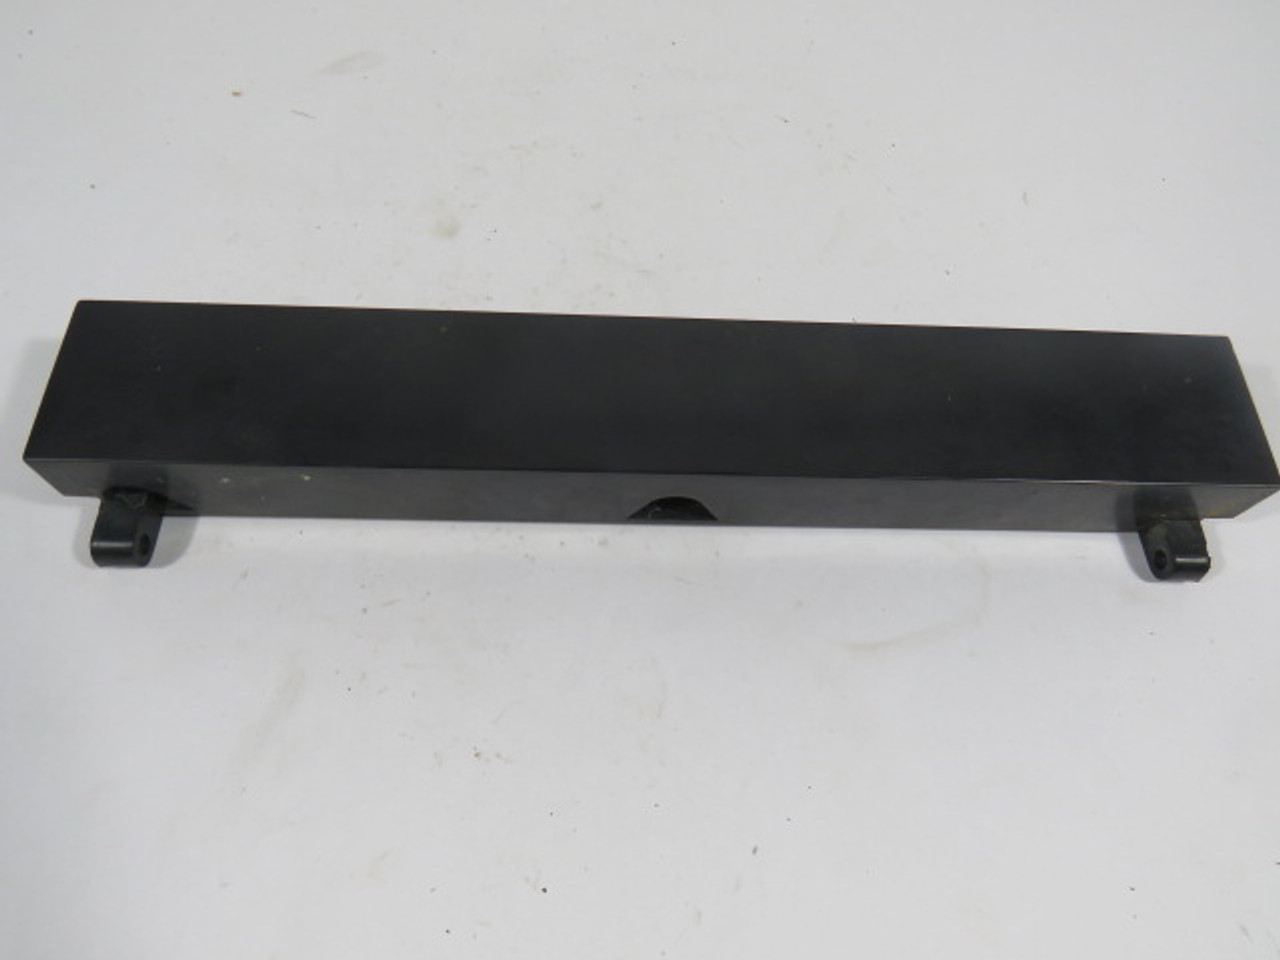 Schneider Electric AS-8228-100 Terminal Strip Holder 9.5" Long USED